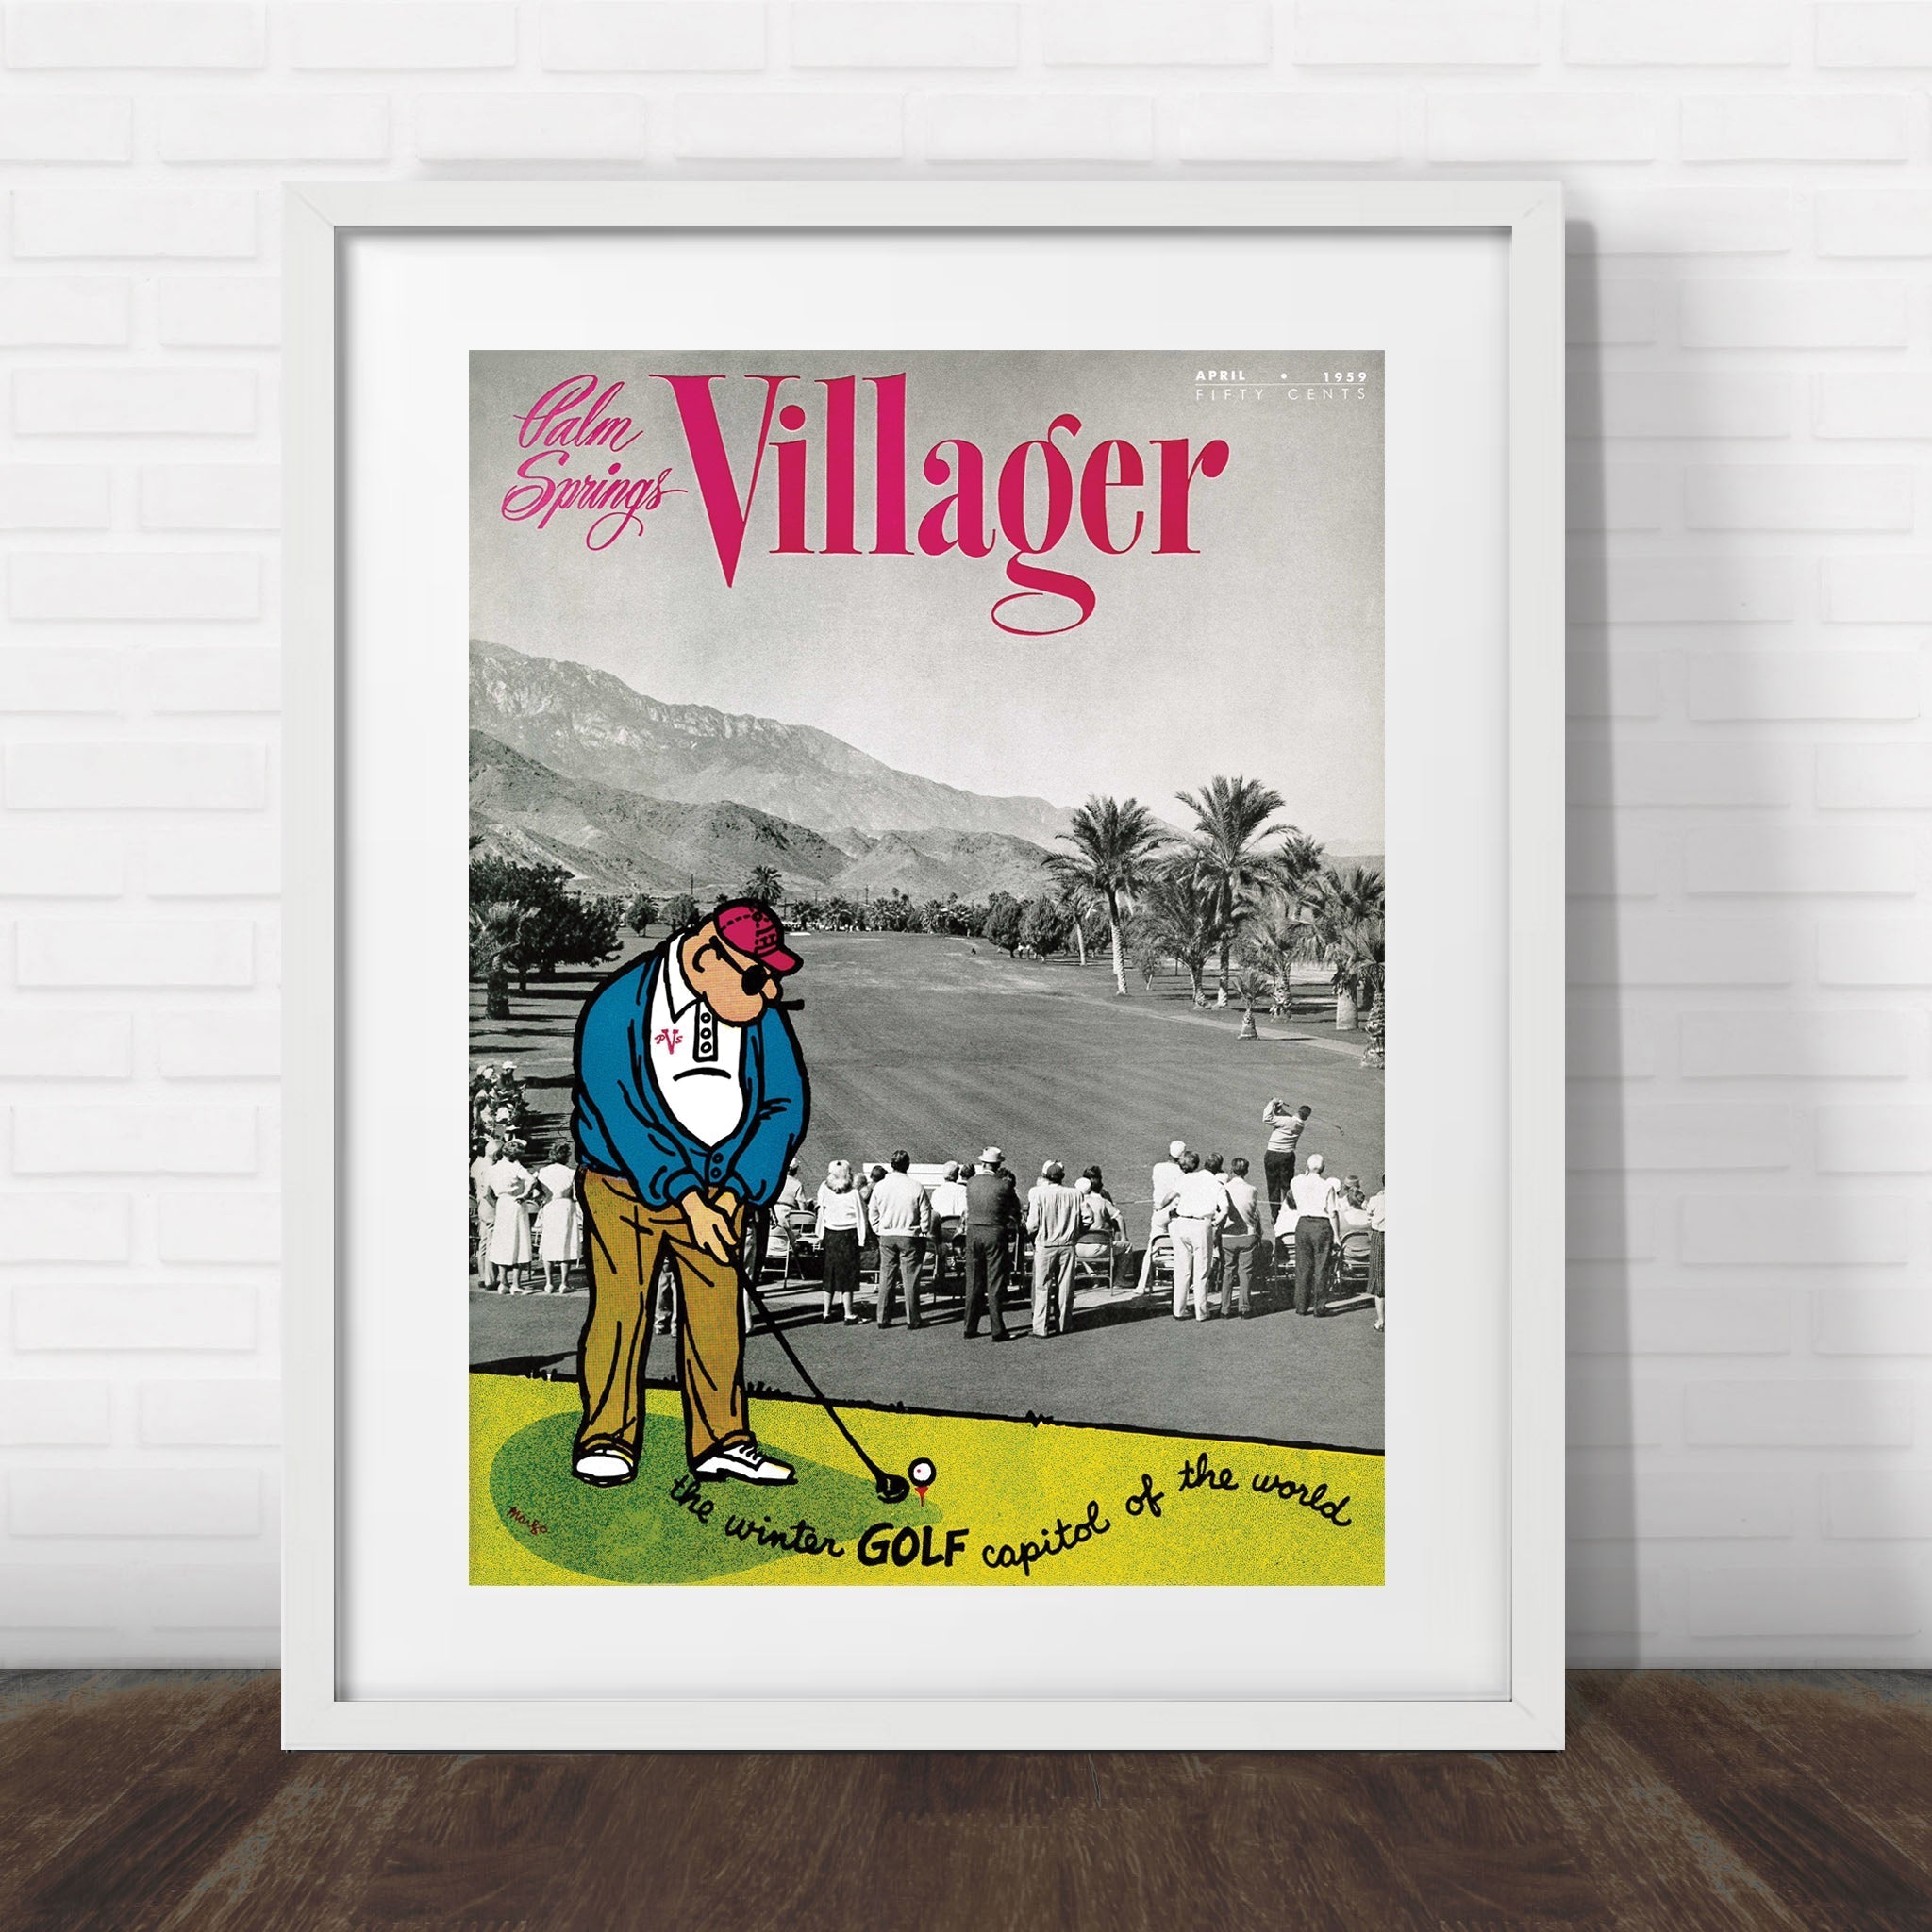 Palm Springs Villager - April 1959 - Cover Poster